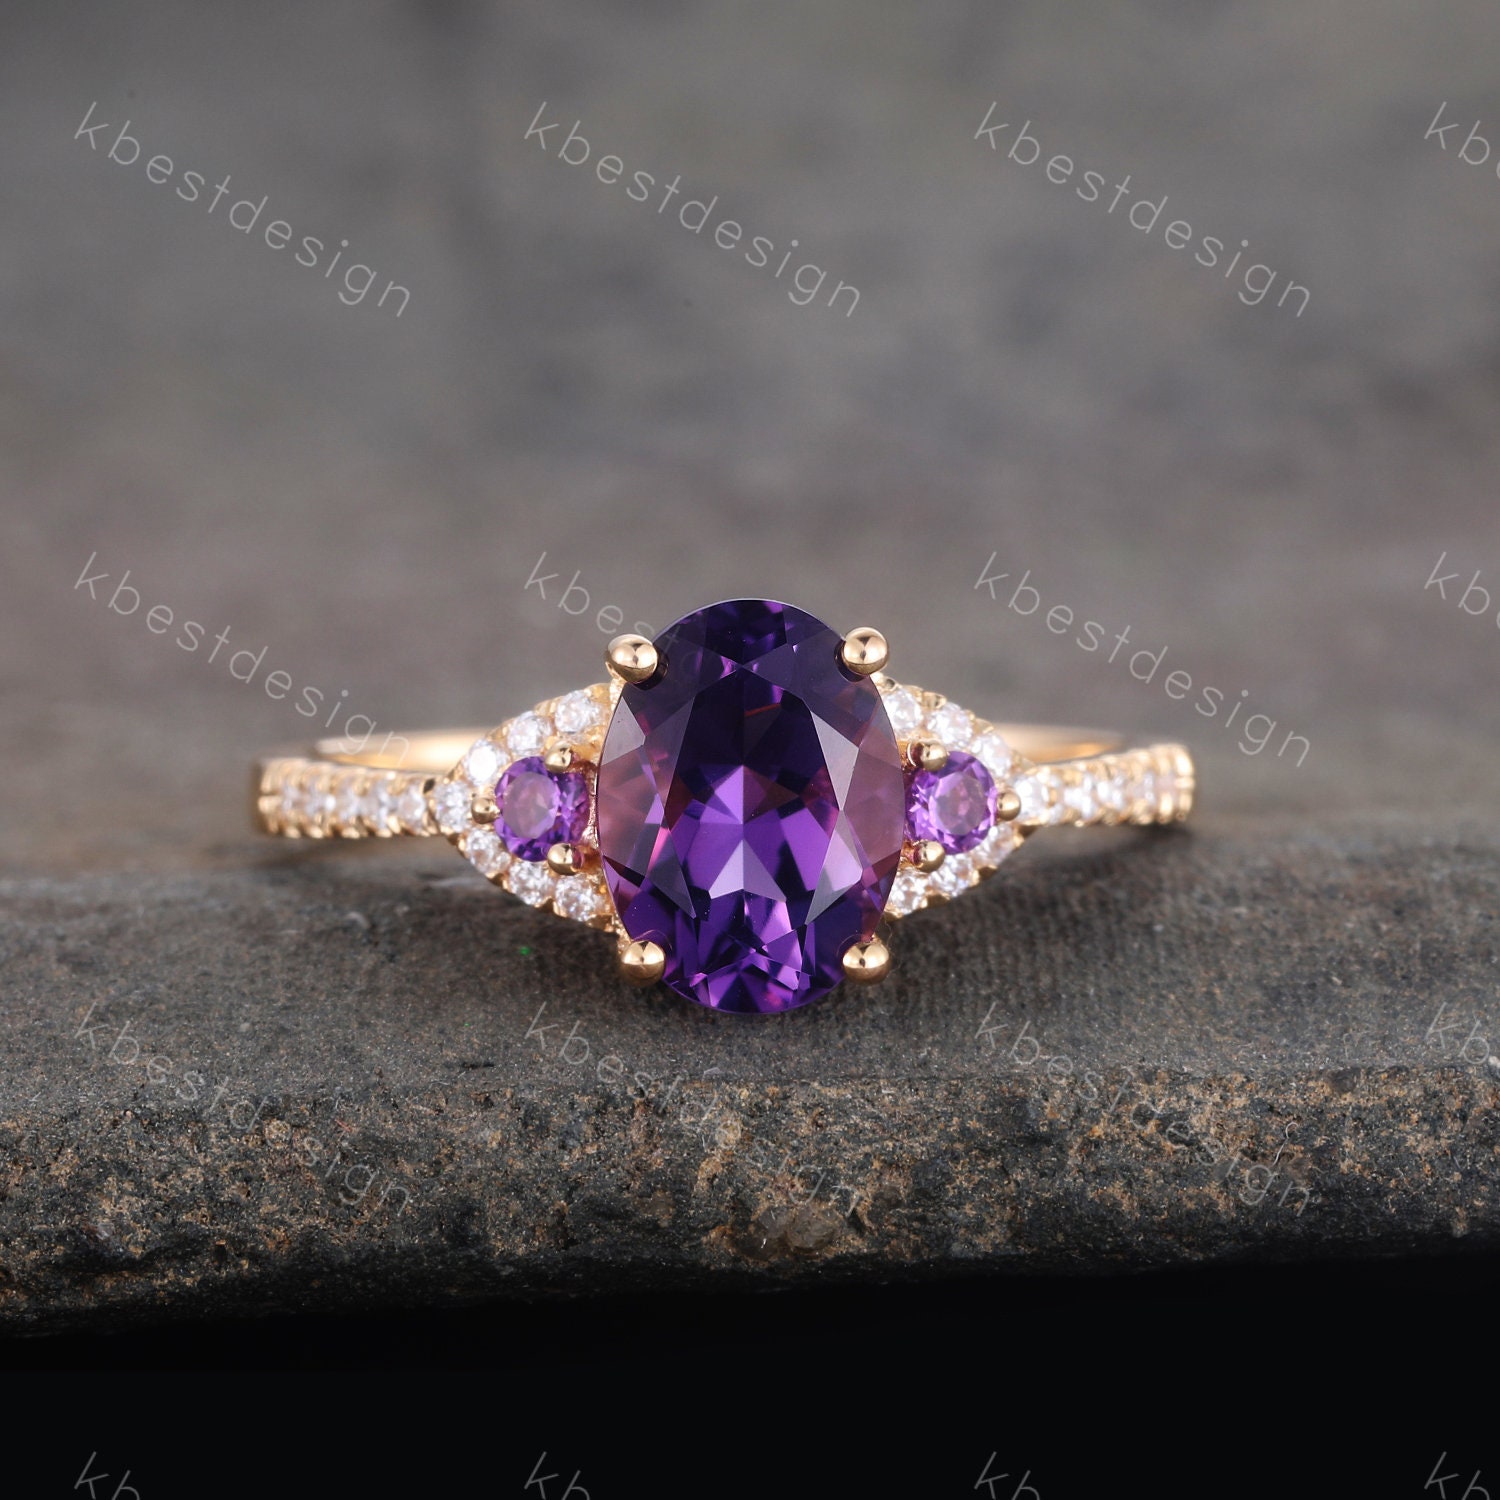 Amethyst Stone | Buy Online Amethyst Healing Crystal Products in India –  Shubhanjali